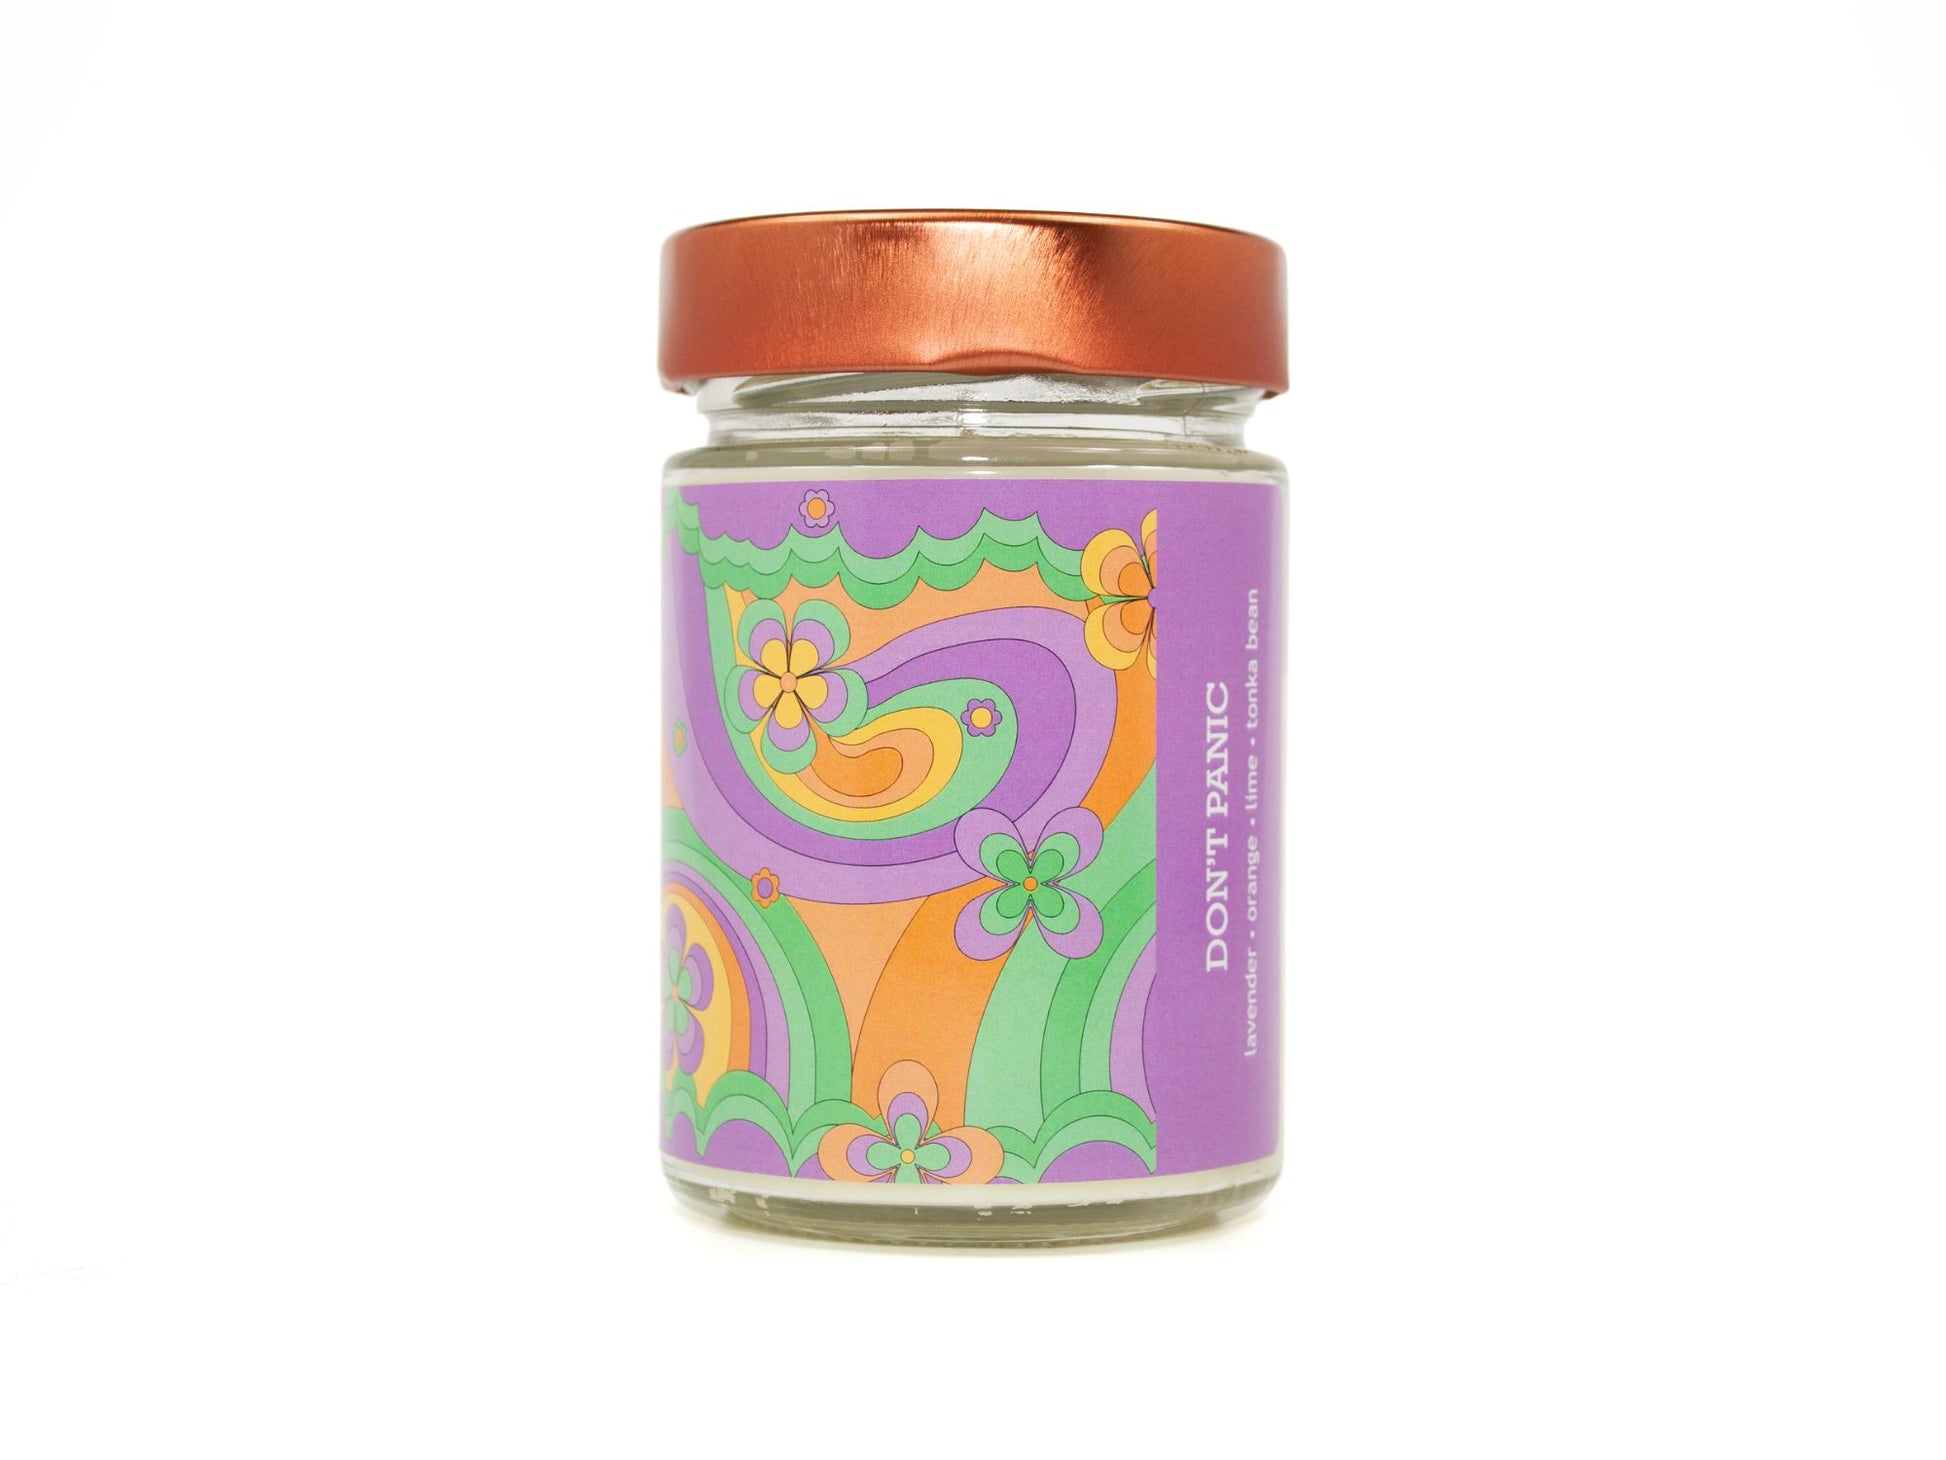 Onset & Rime relaxing lavendar scented candle called "Don't Panic" in a 10 oz glass jar with copper lid. The label is a wavy psychedelic pattern with purple, green and orange flowers. The text on the label is "Don't Panic - Lavender, Orange, Lime, Tonka Bean".